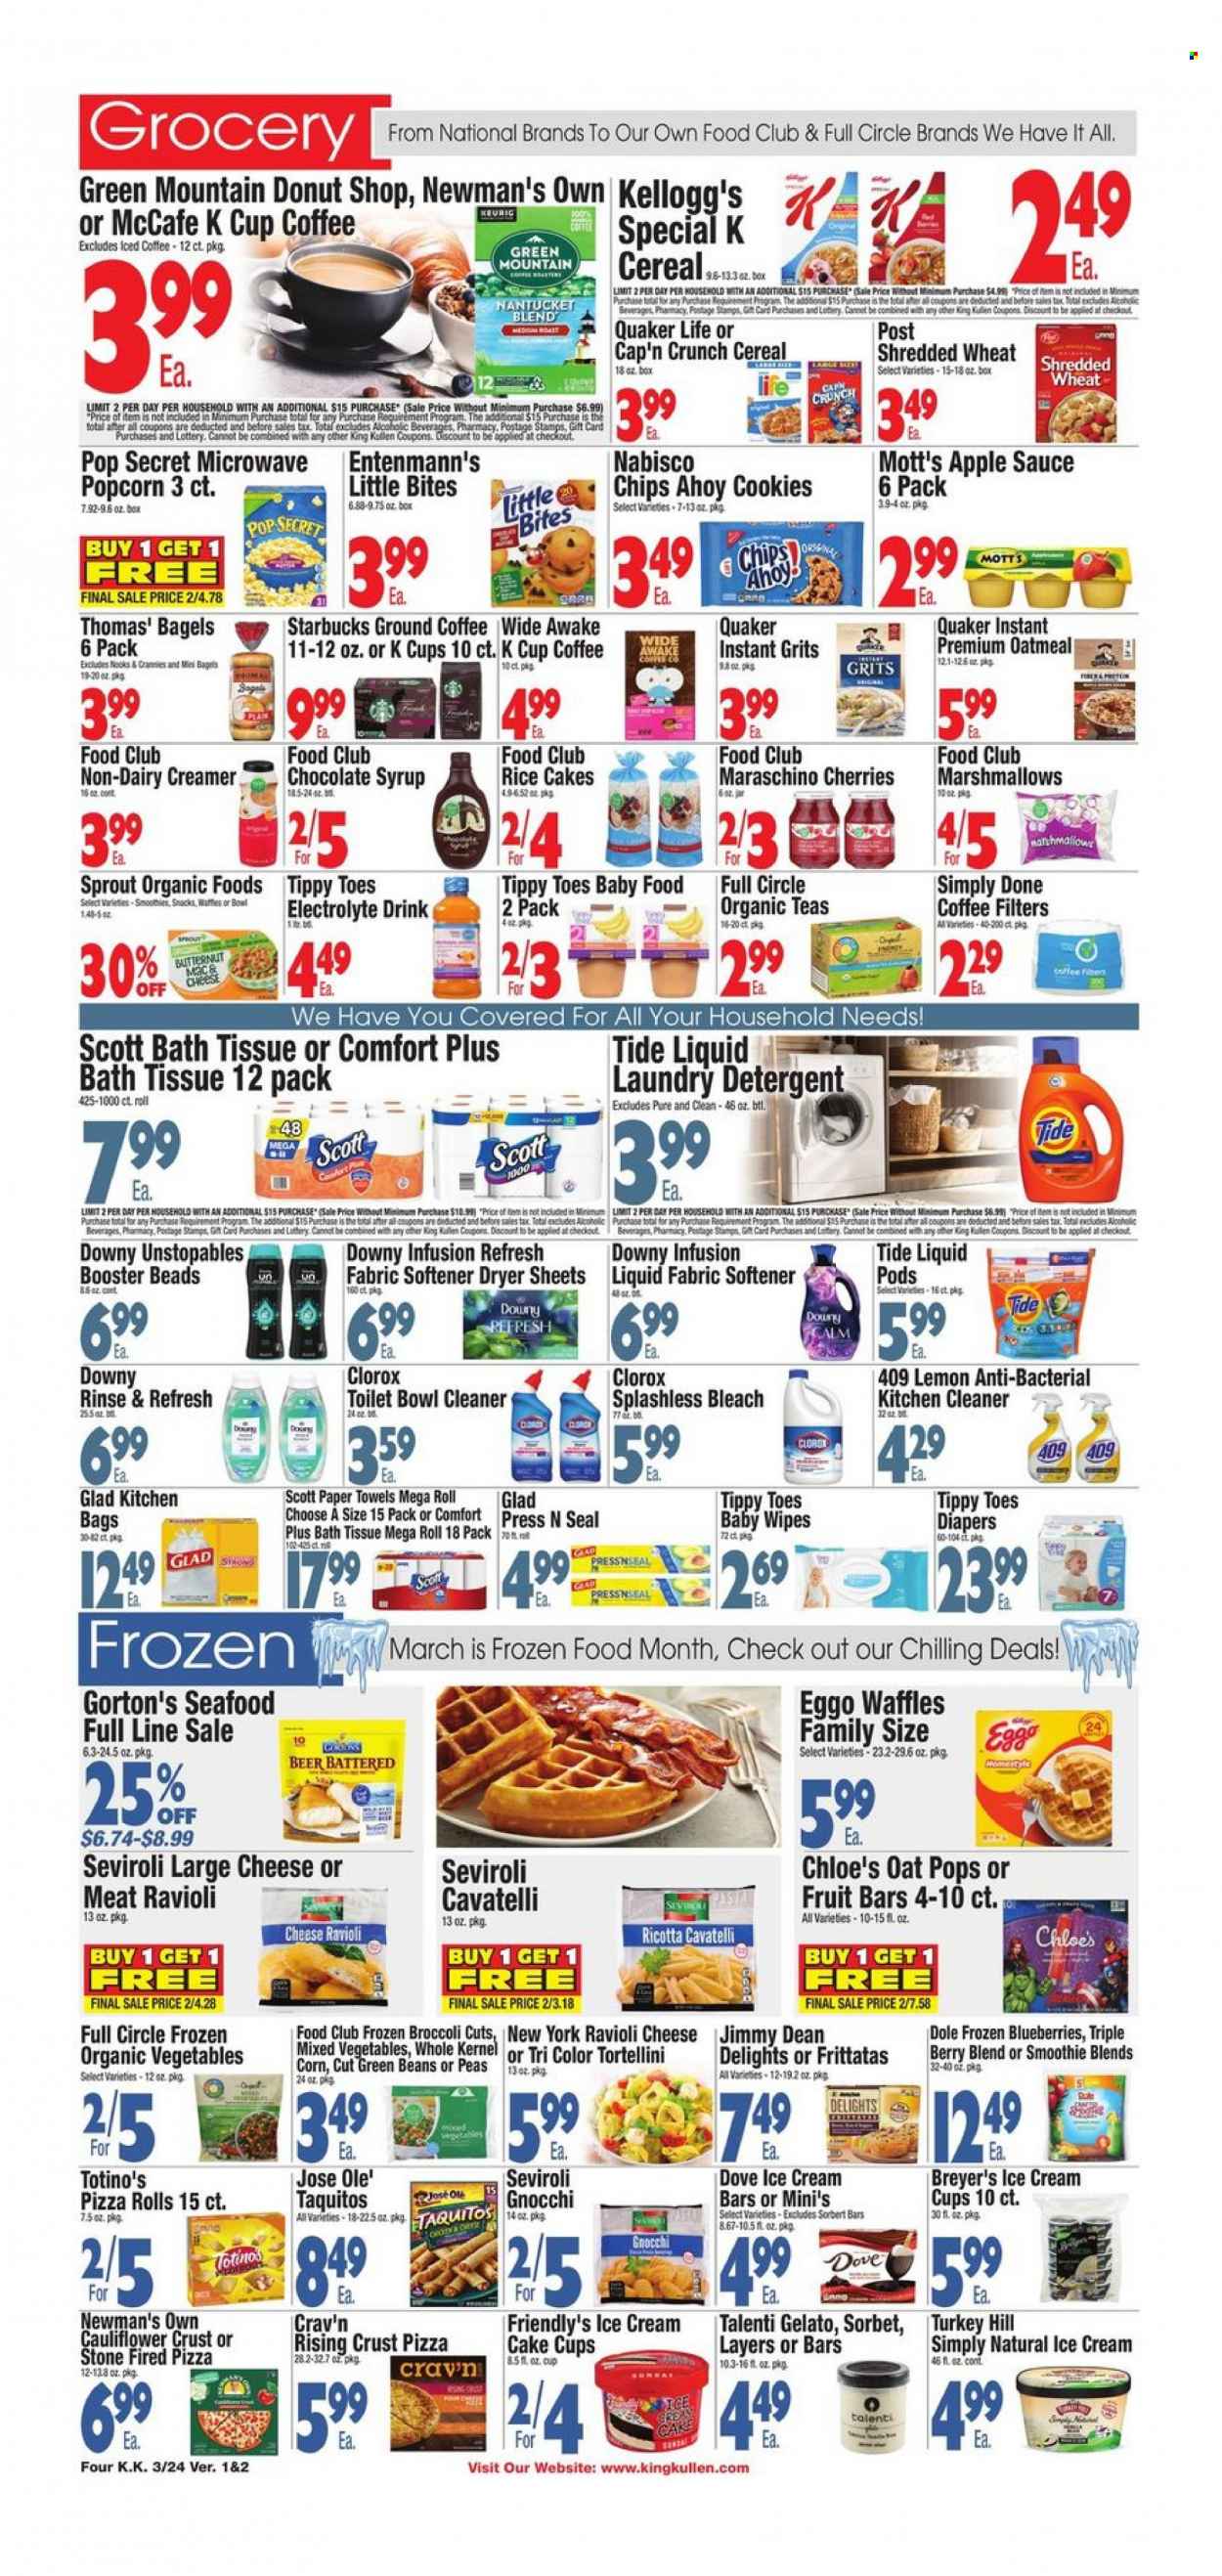 thumbnail - King Kullen Flyer - 03/24/2023 - 03/30/2023 - Sales products - bagels, pizza rolls, waffles, Entenmann's, broccoli, butternut squash, corn, green beans, peas, Dole, blueberries, Mott's, seafood, Gorton's, gnocchi, ravioli, pizza, pasta, sauce, tortellini, Quaker, taquitos, Jimmy Dean, non dairy creamer, creamer, ice cream, ice cream bars, Talenti Gelato, Friendly's Ice Cream, gelato, frozen vegetables, mixed vegetables, cookies, Dove, marshmallows, snack, Kellogg's, Little Bites, popcorn, oatmeal, oats, grits, Maraschino cherries, cereals, Cap'n Crunch, apple sauce, chocolate syrup, syrup, smoothie, iced coffee, Starbucks, ground coffee, coffee capsules, McCafe, K-Cups, Green Mountain, beer, wipes, baby wipes, nappies, bath tissue, Scott, kitchen towels, paper towels, detergent, cleaner, bleach, Clorox, Tide, Unstopables, fabric softener, laundry detergent, dryer sheets. Page 4.